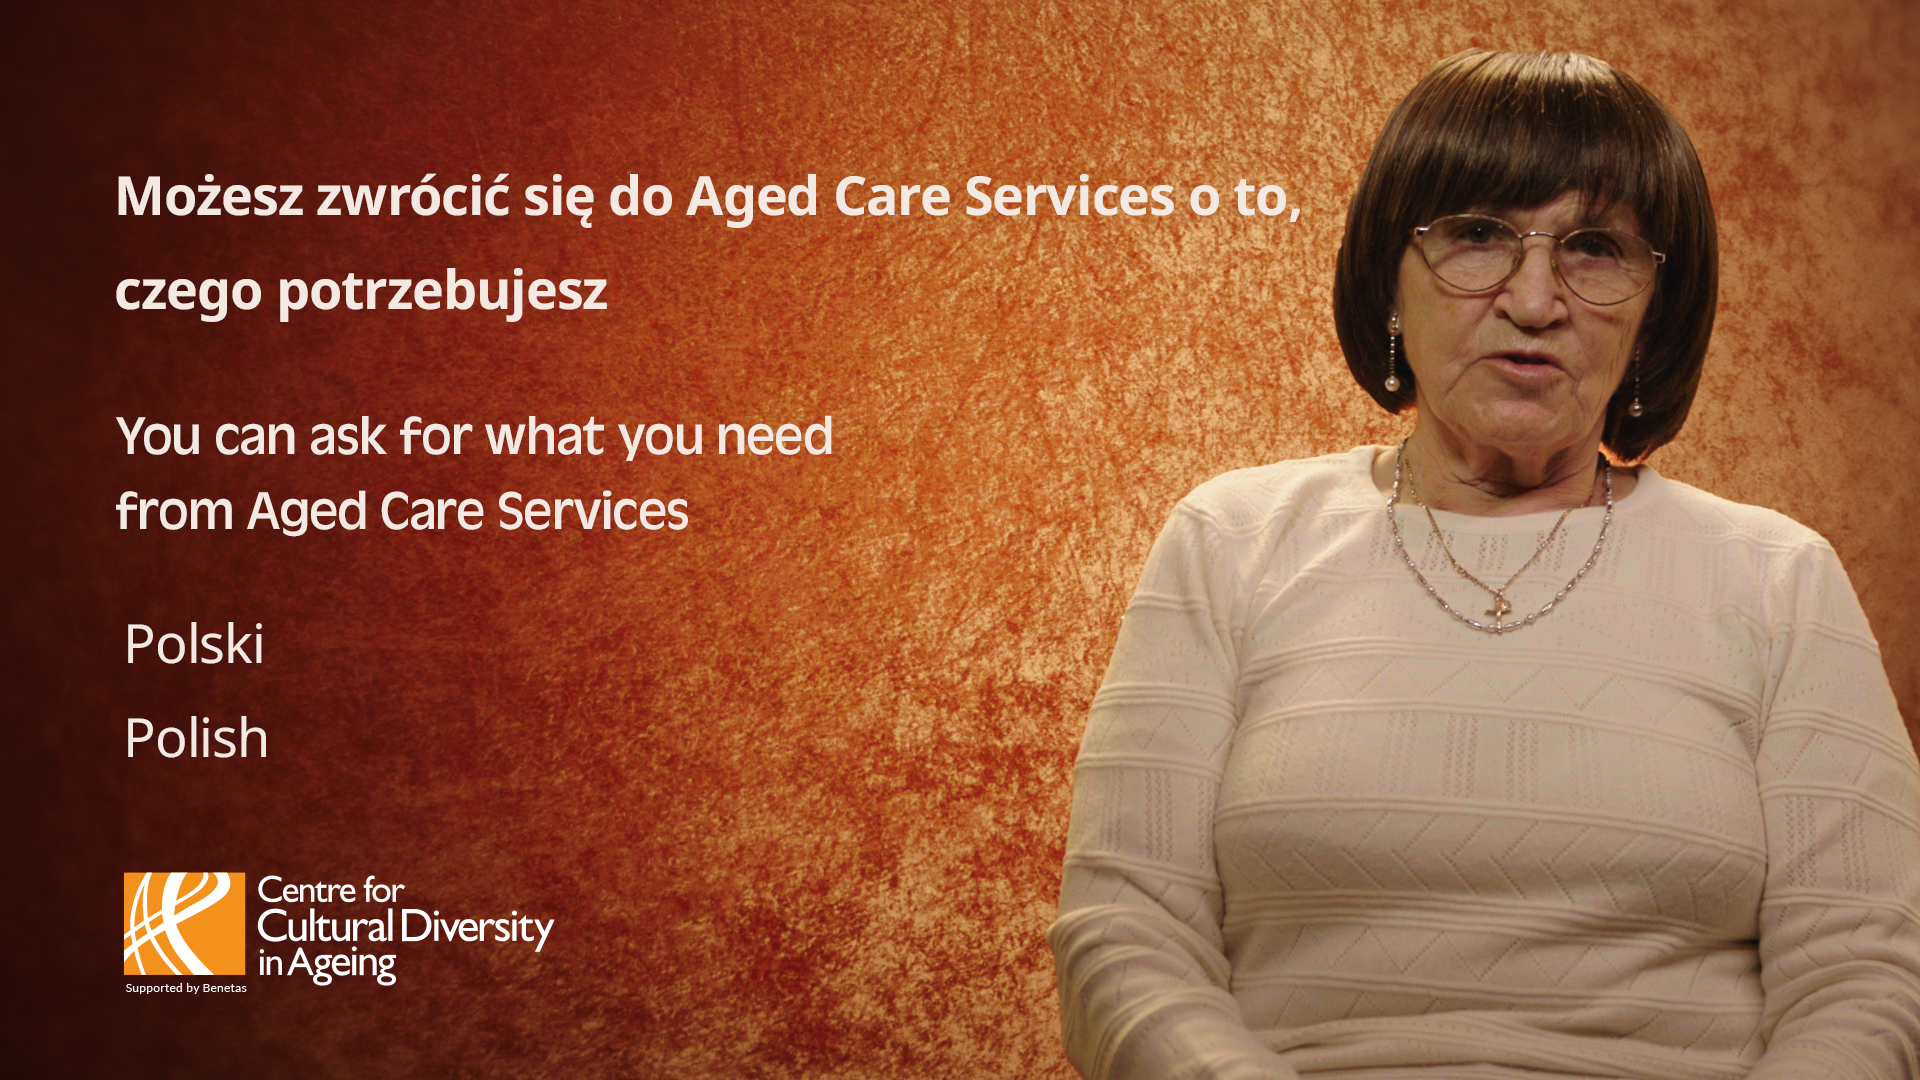 You can ask for what you need from aged care services polish thumbnail